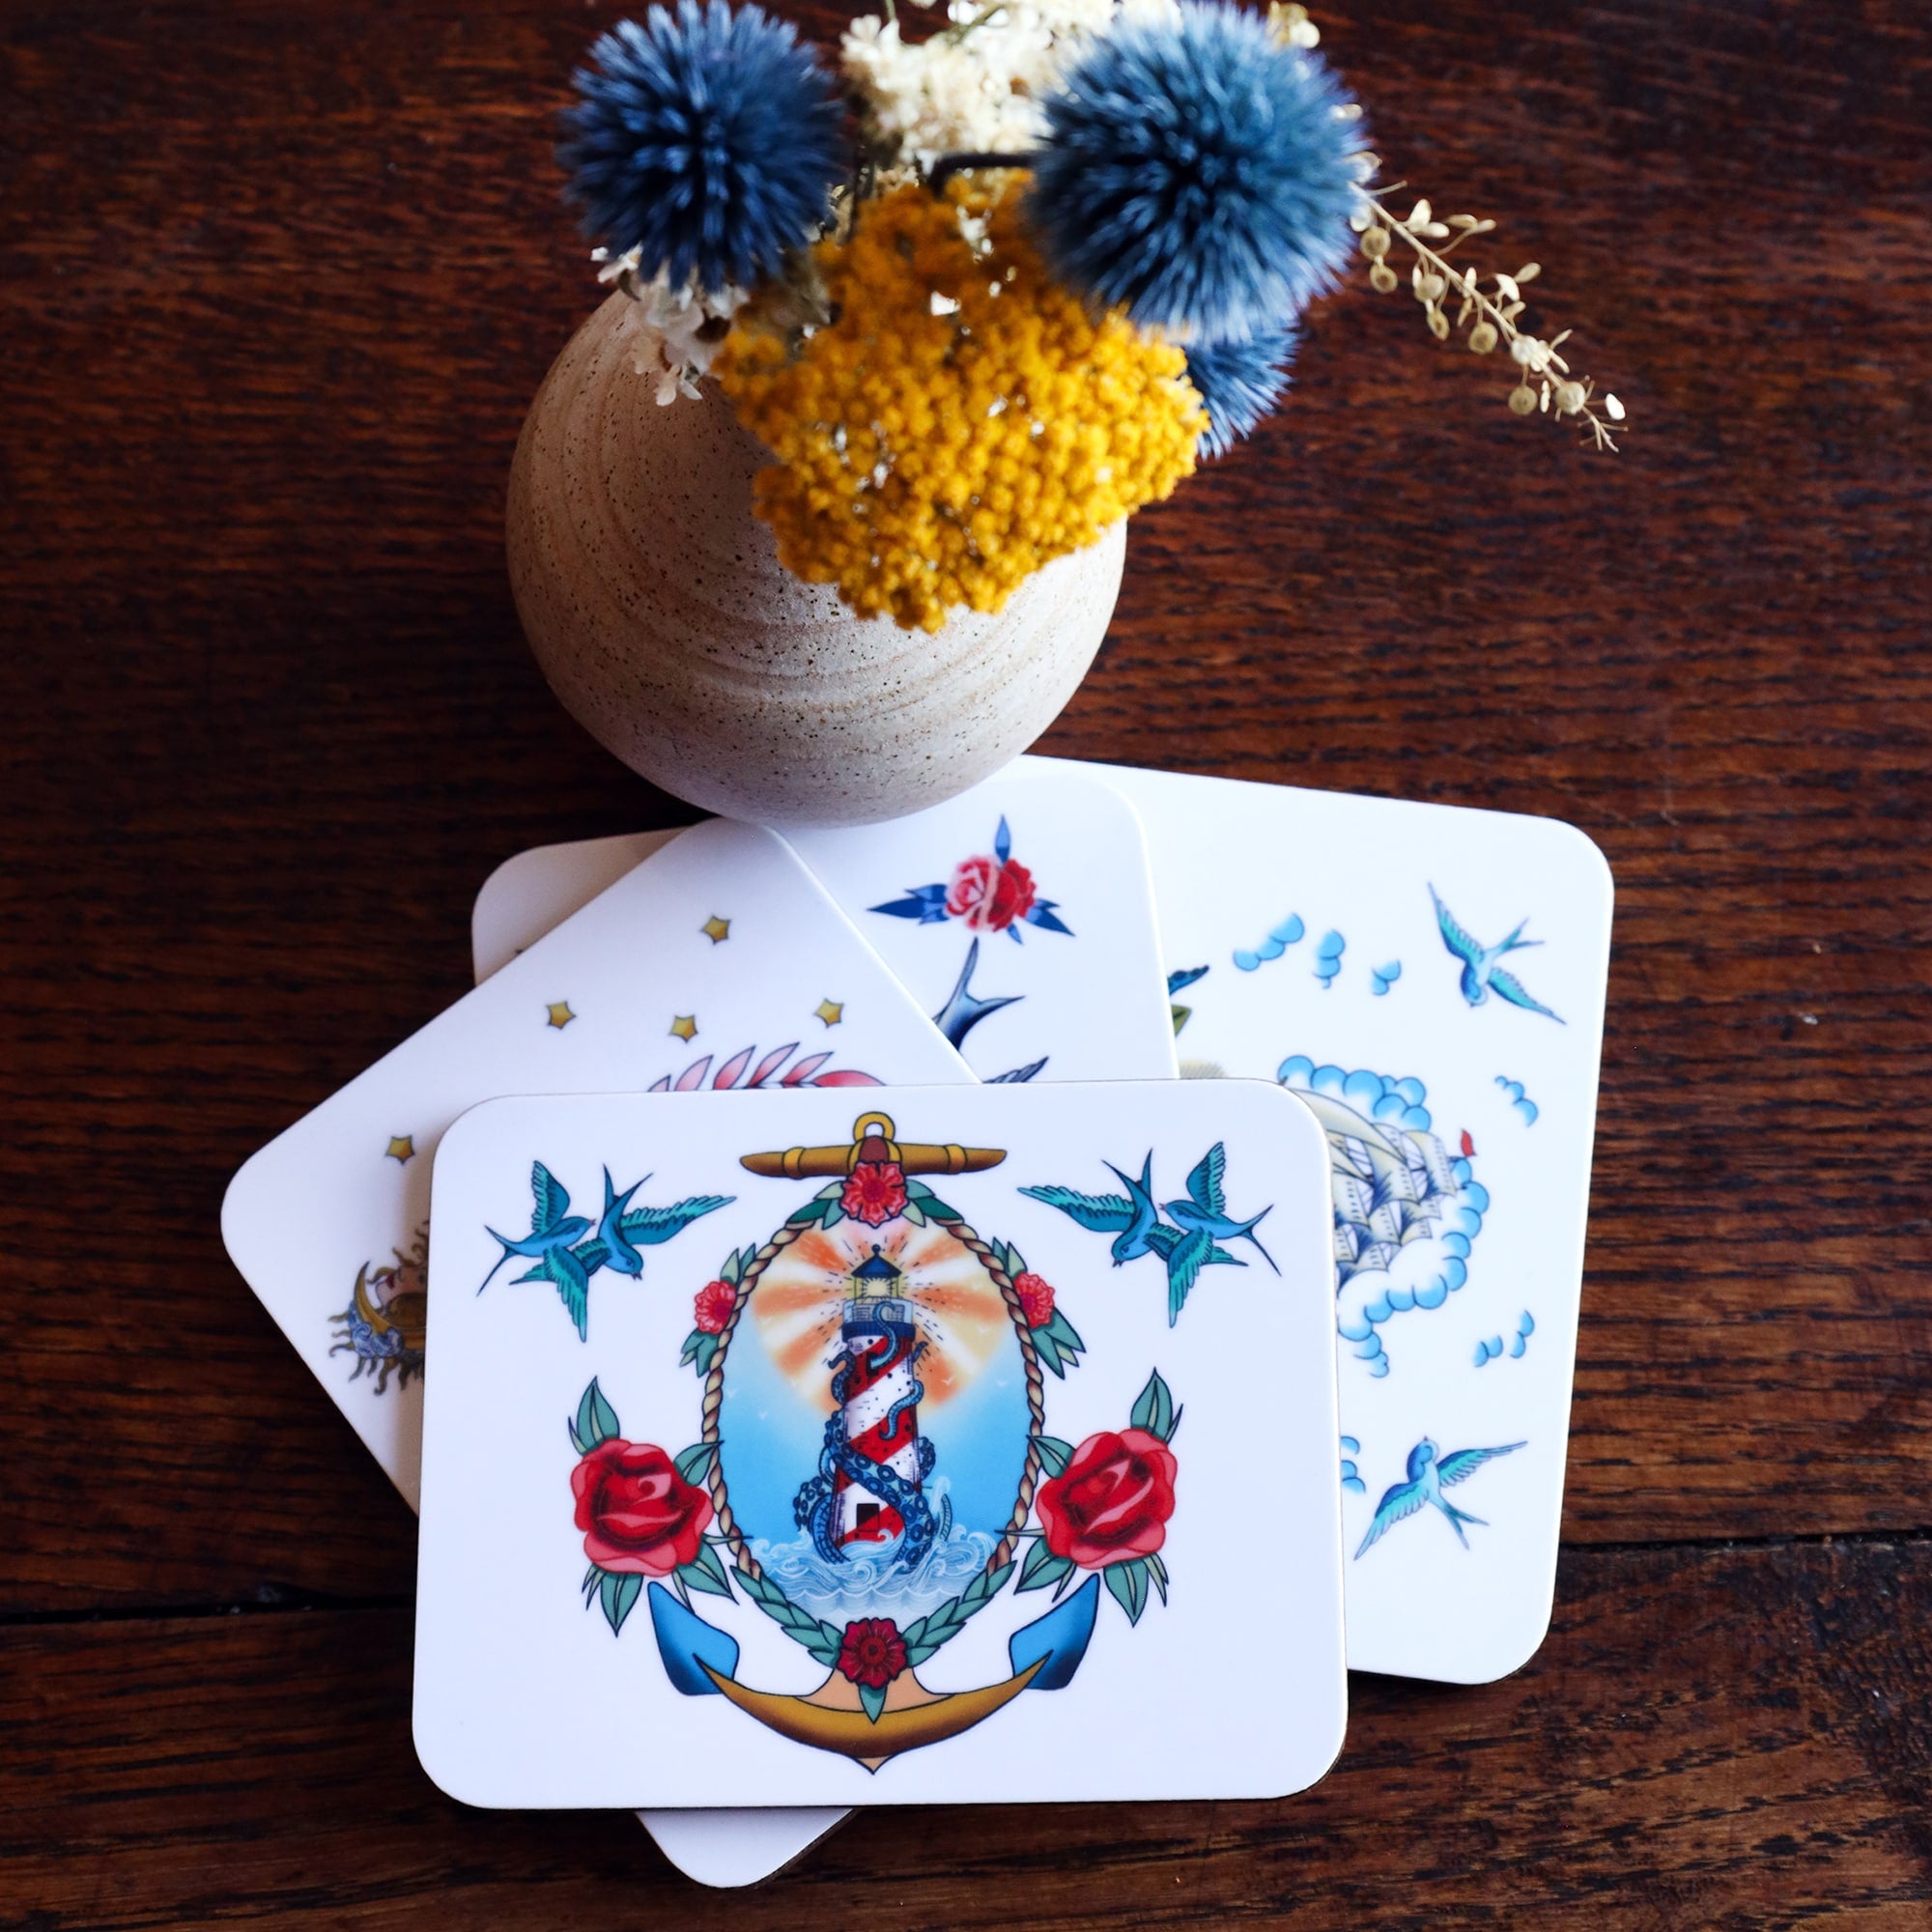 4 melamine coasters with sailors tattoo designs in a pile on dark wood table top with a small vase with dried flowers. Only the top coaster is fully visible with lighthouse and kraken design surrounded by swallows and roses.